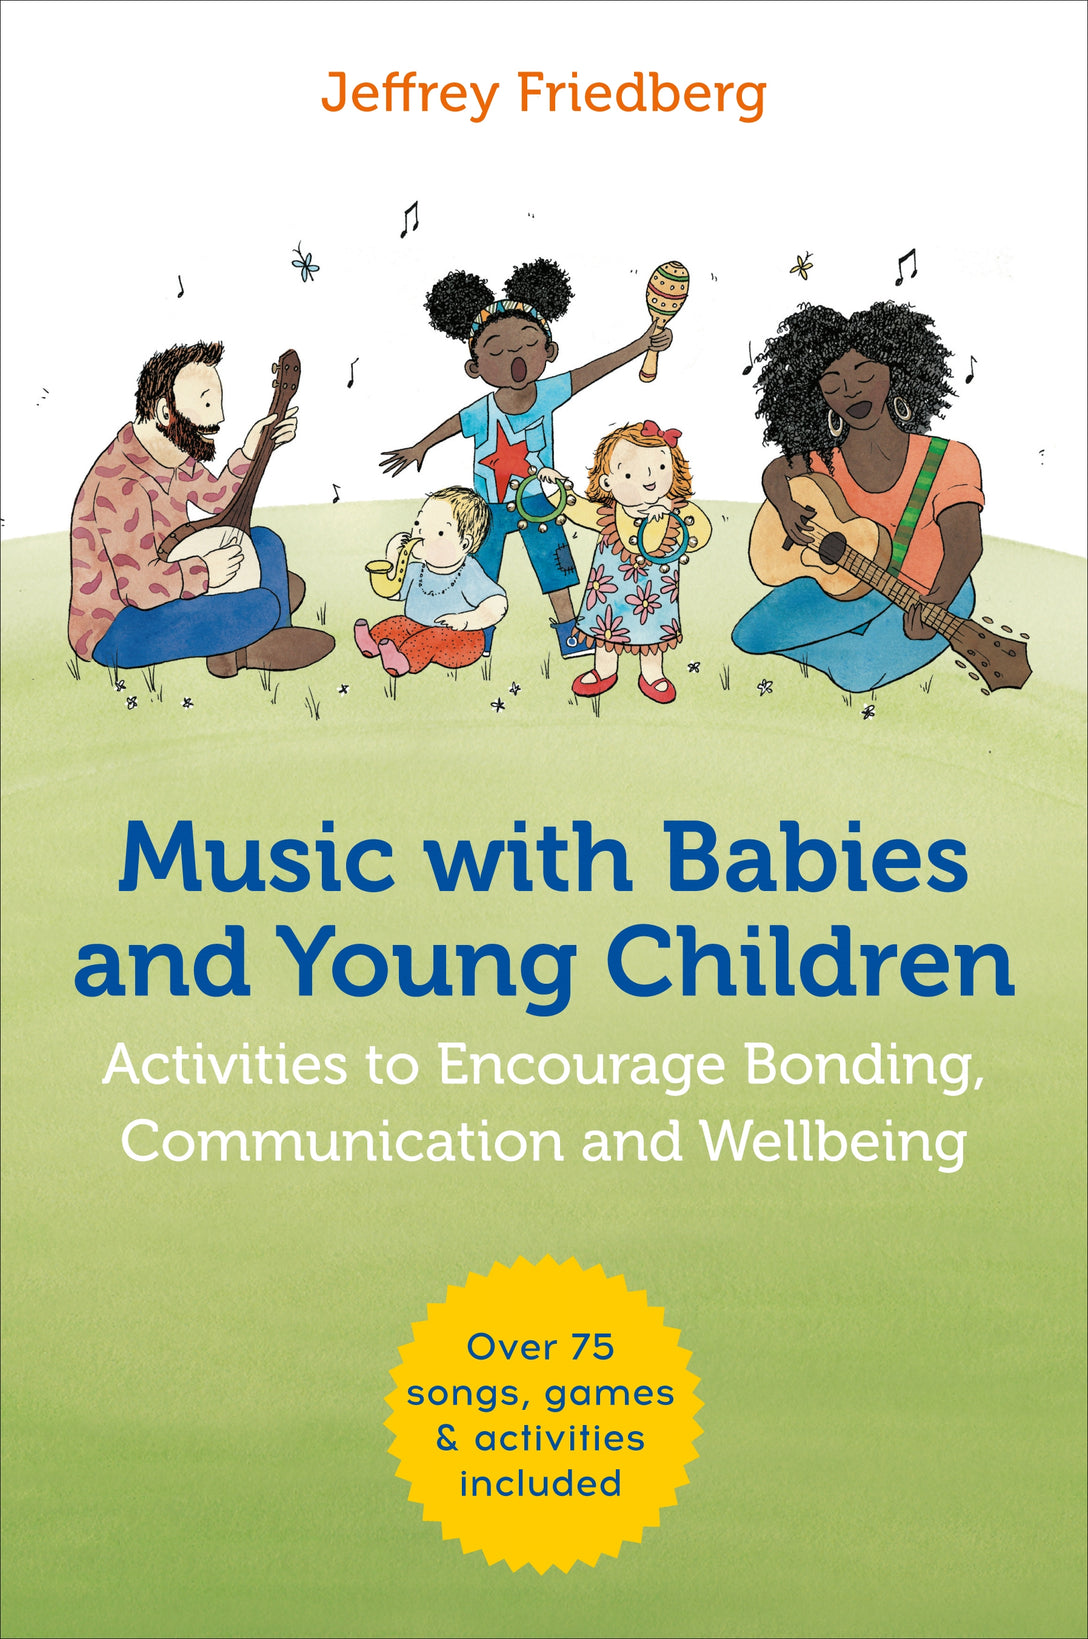 Music with Babies and Young Children by Jeffrey Friedberg, Chlöe Applin